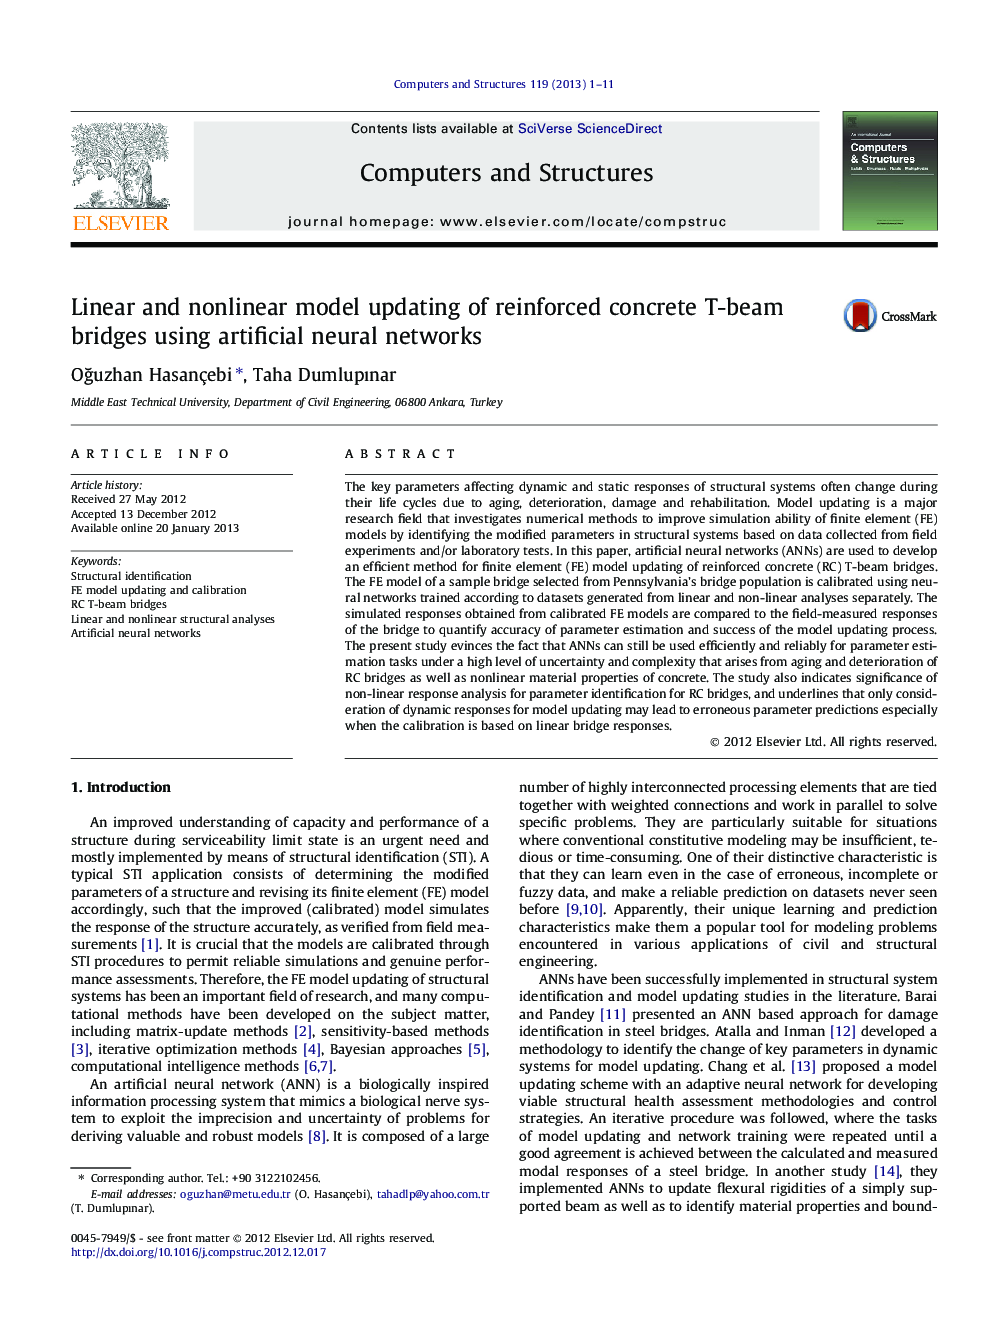 Linear and nonlinear model updating of reinforced concrete T-beam bridges using artificial neural networks